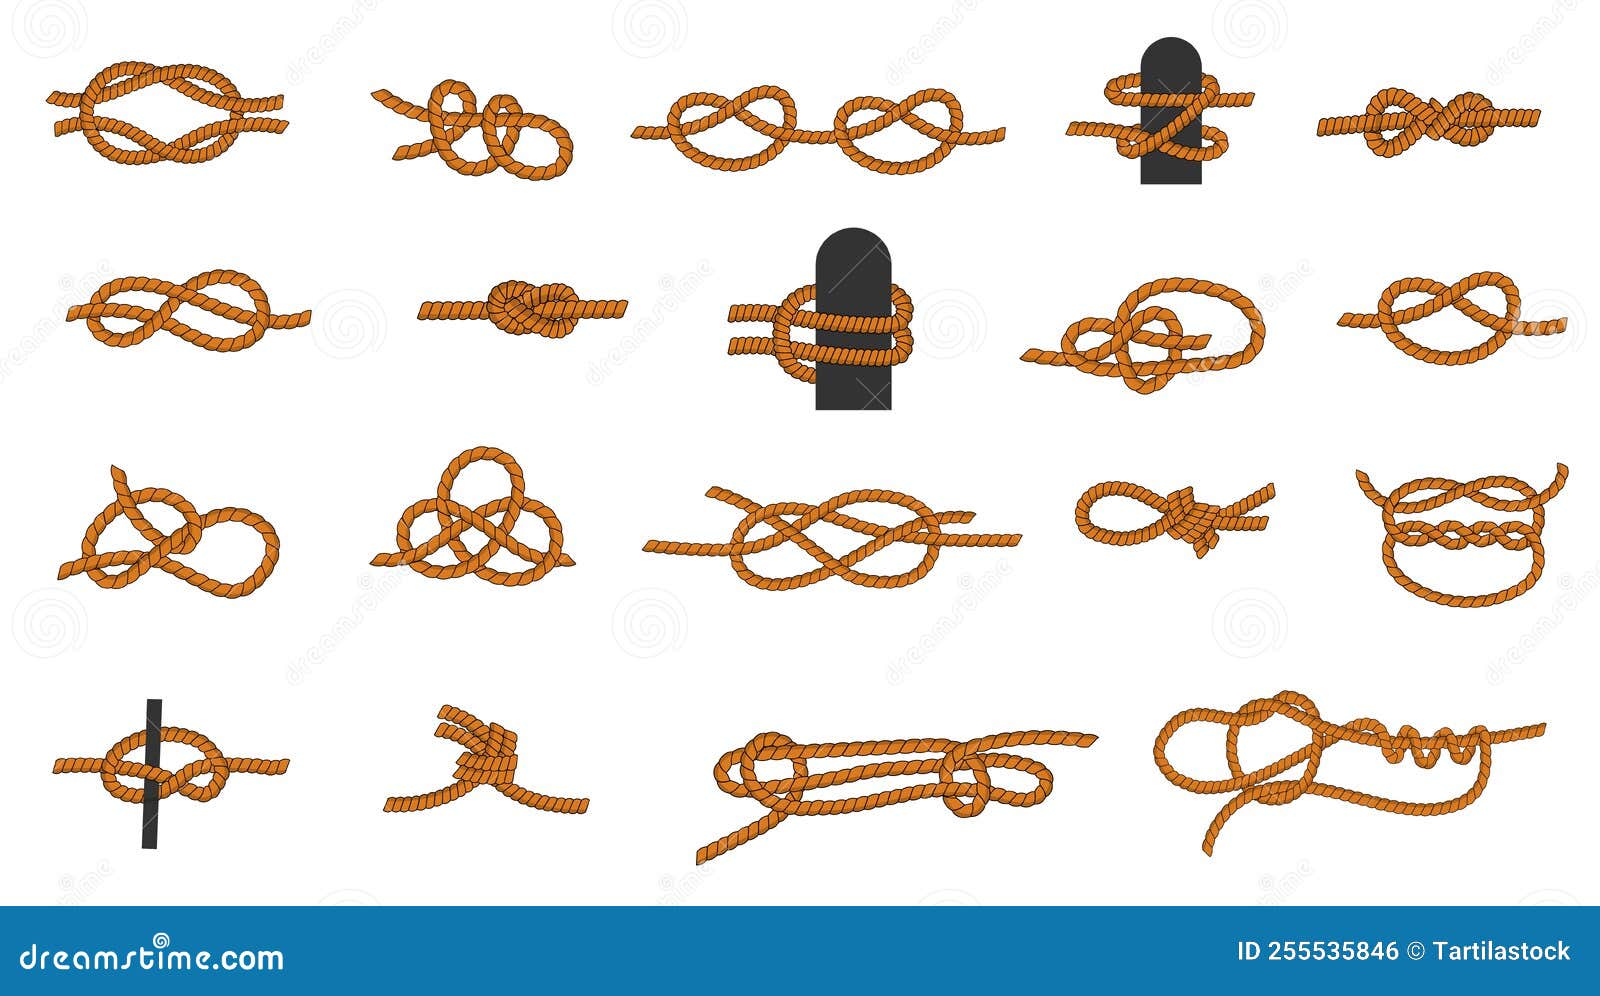 Knot Types. Cartoon Knotted Rope with Ties and Threads for Boating